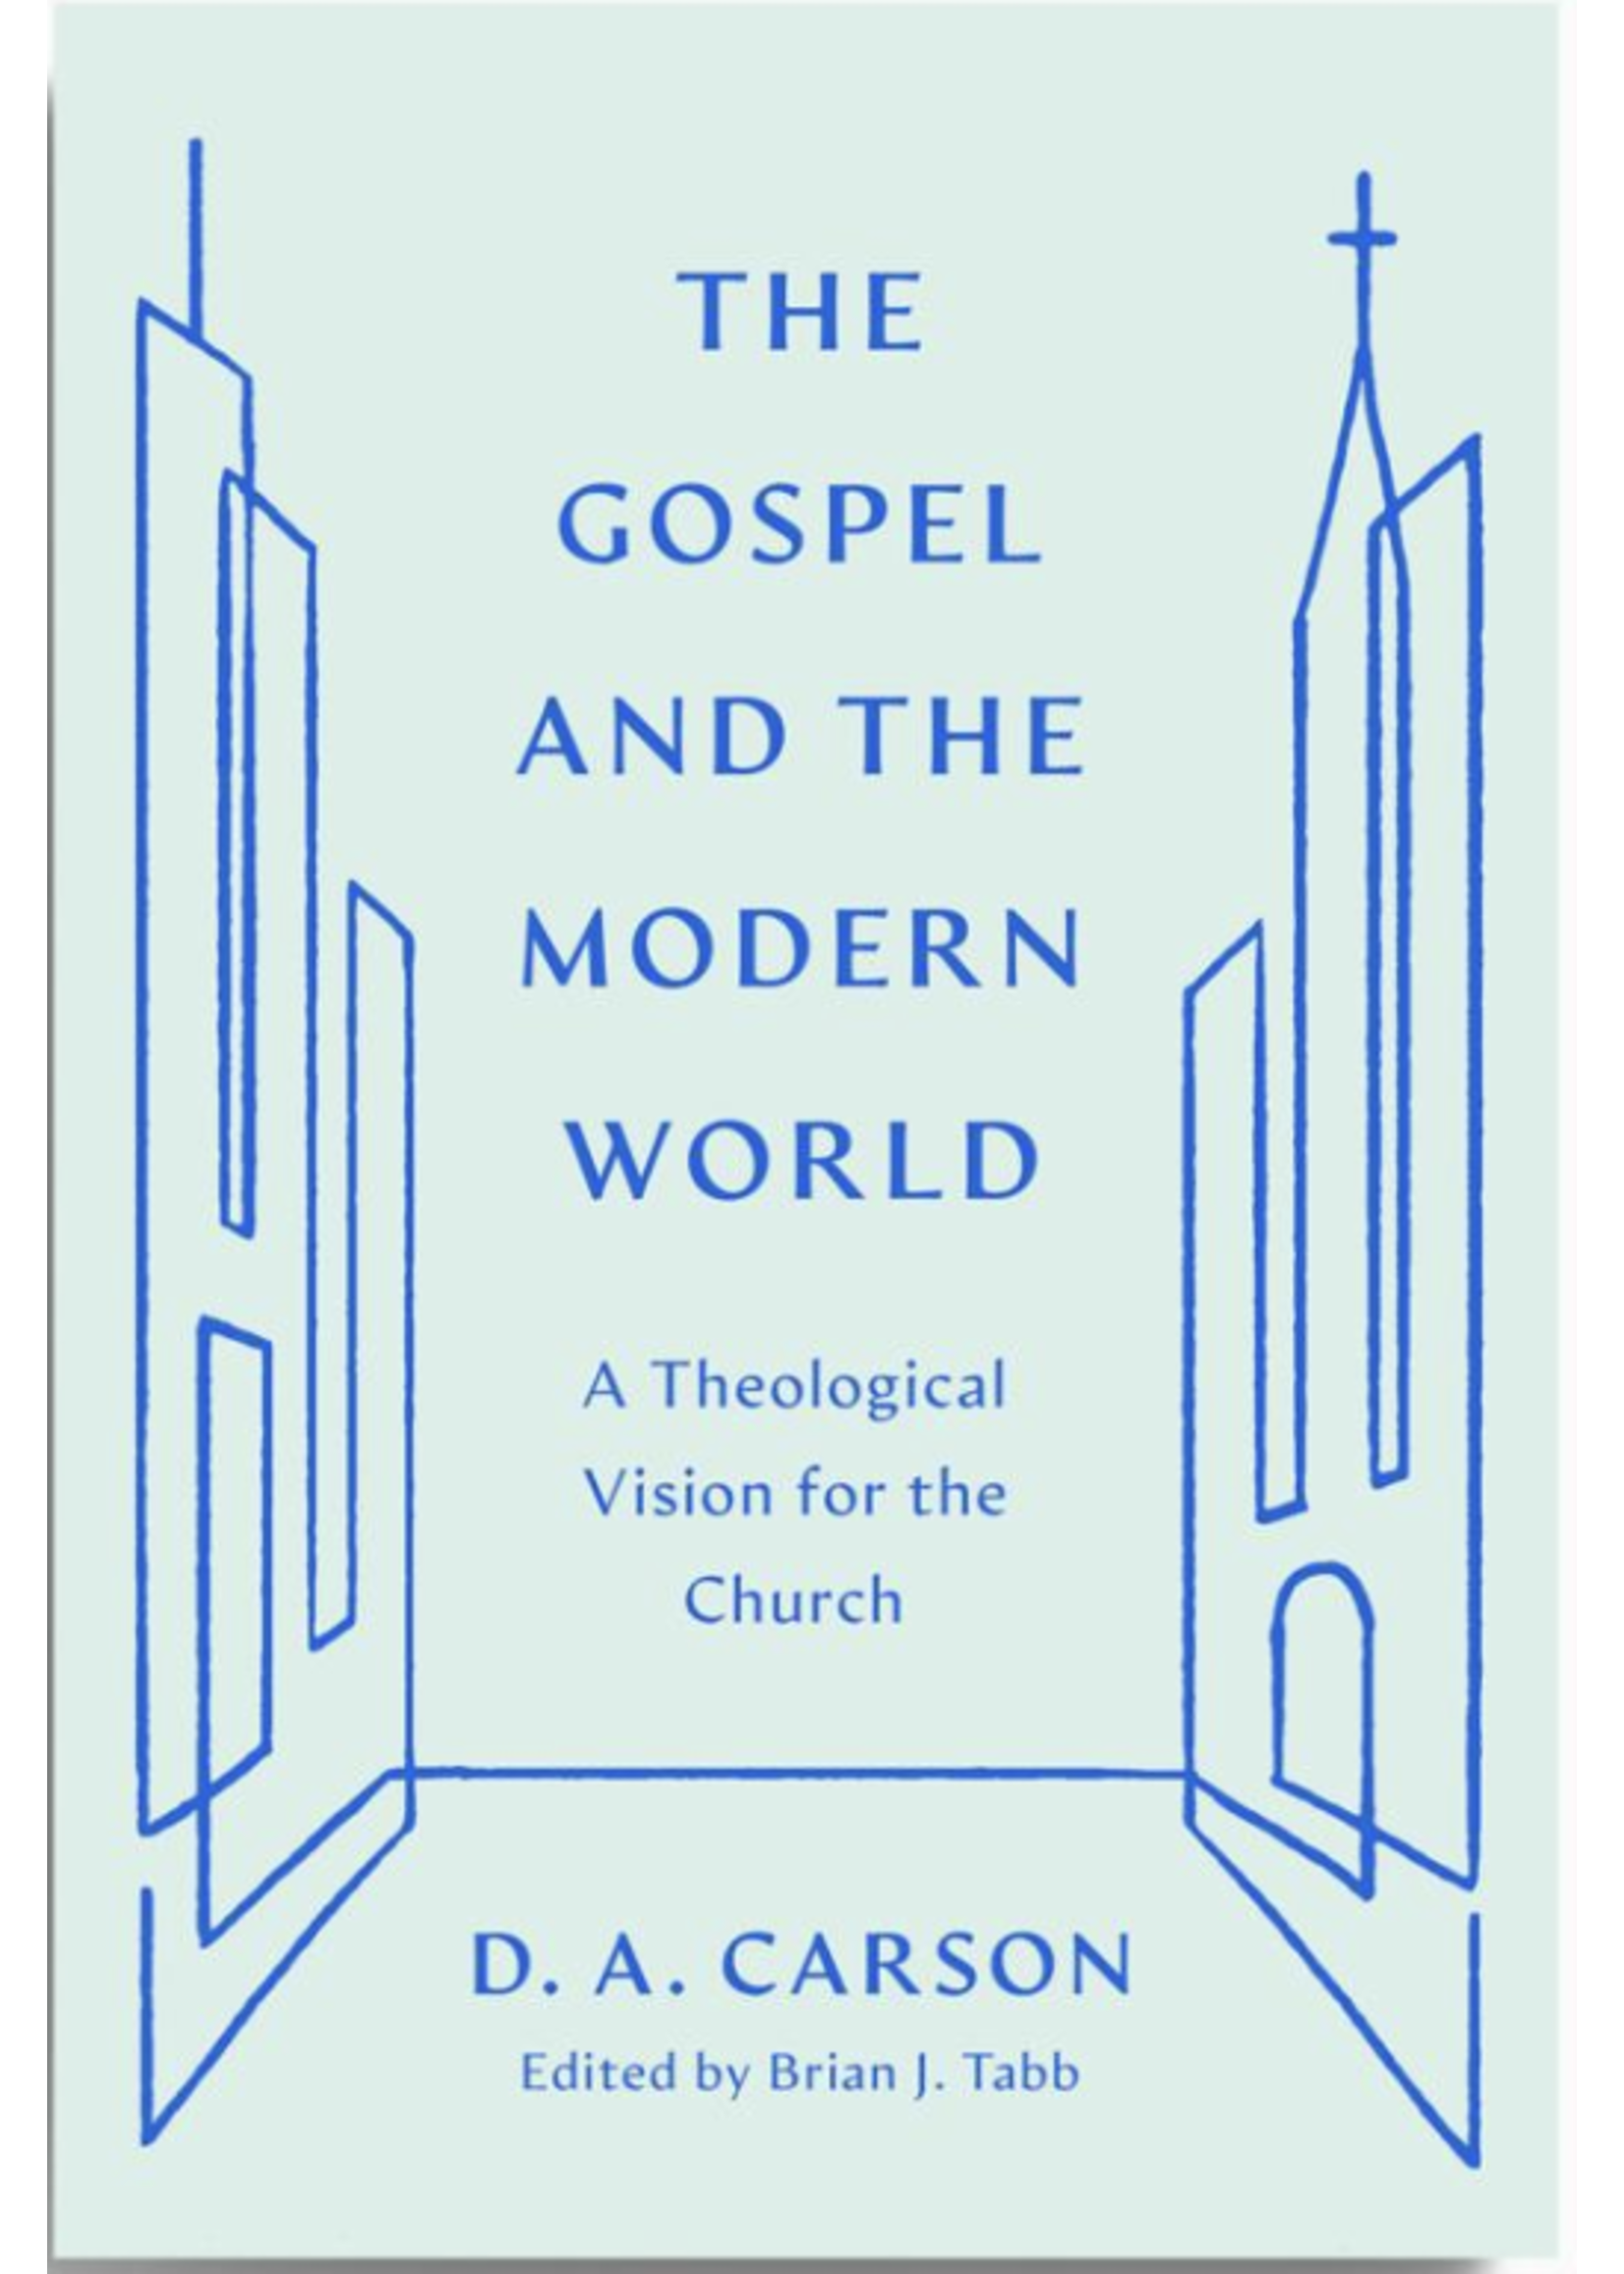 The Gospel And The Modern World:A Theological Vision for the Church [D. A. Carson)